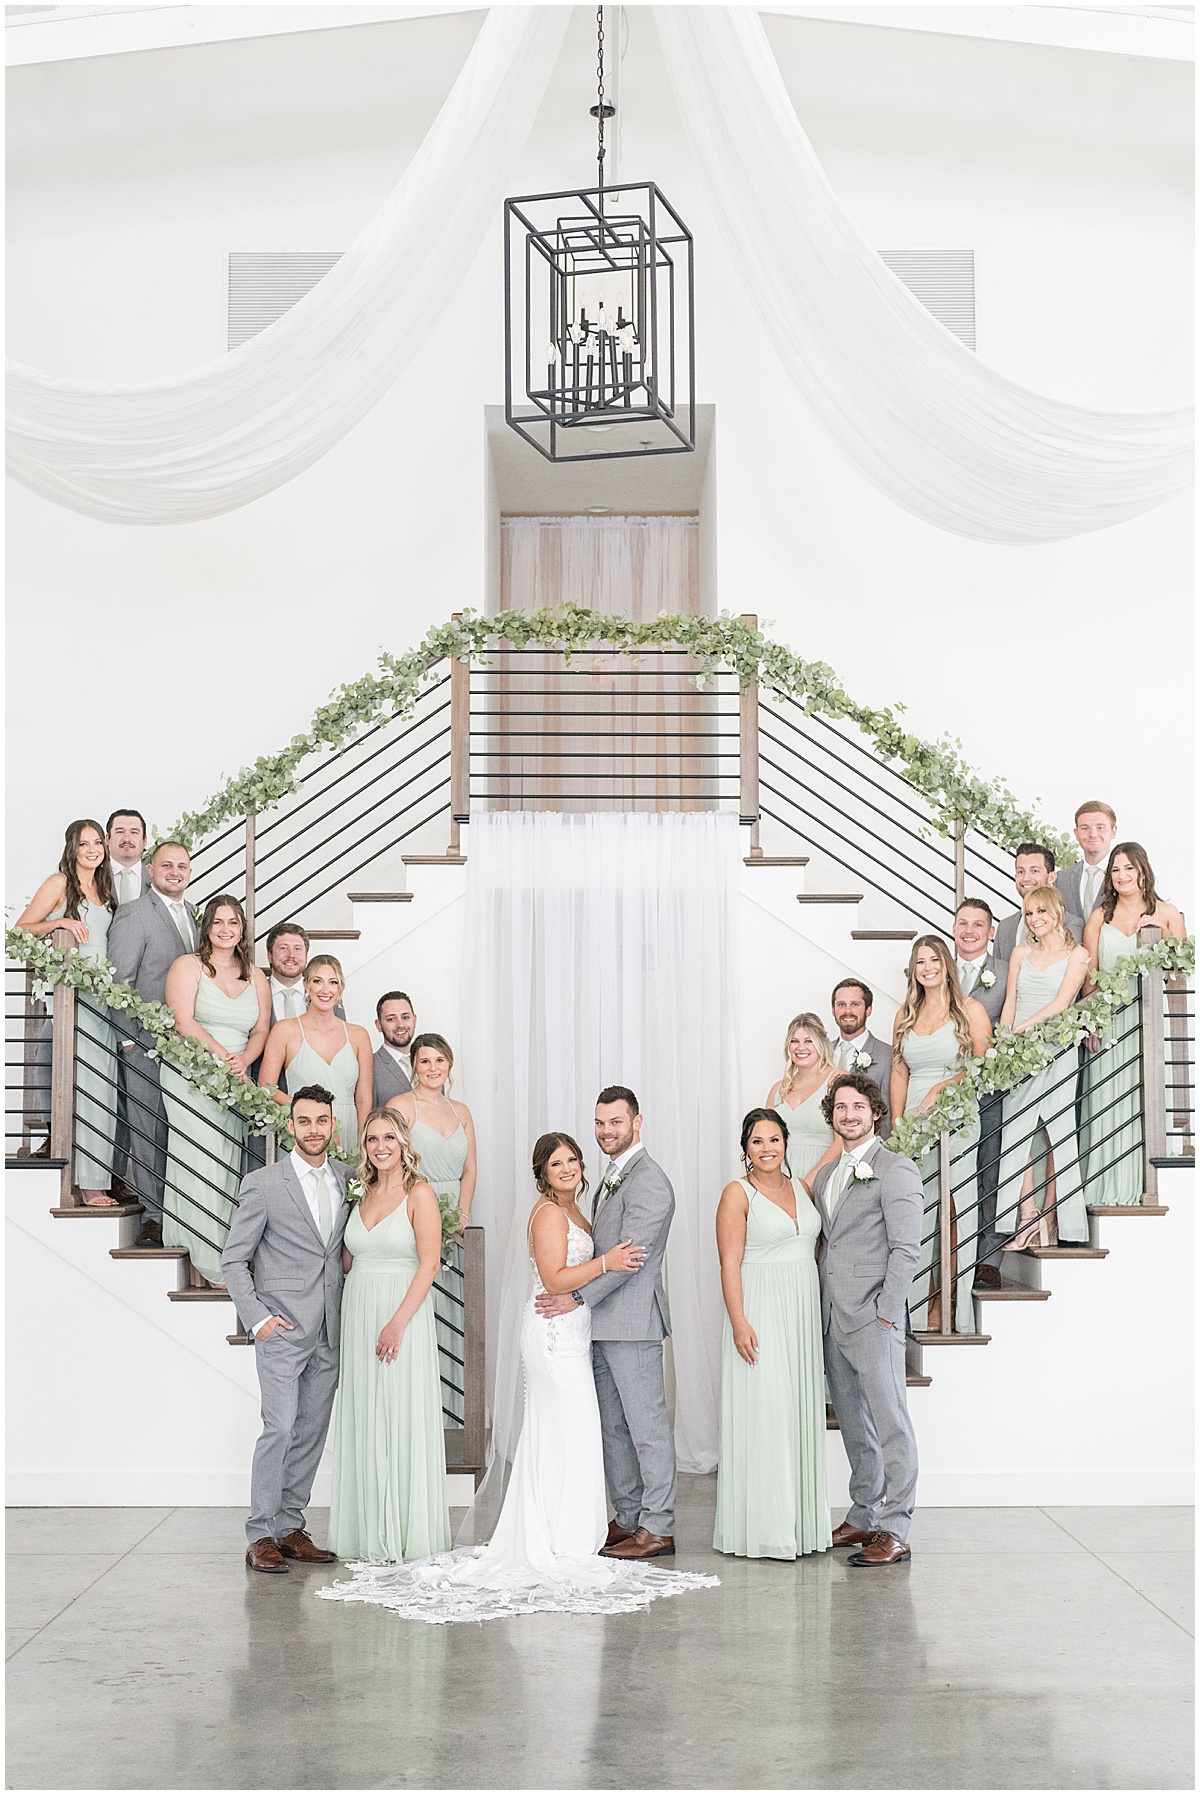 Bridal party on staircase for wedding at New Journey Farms